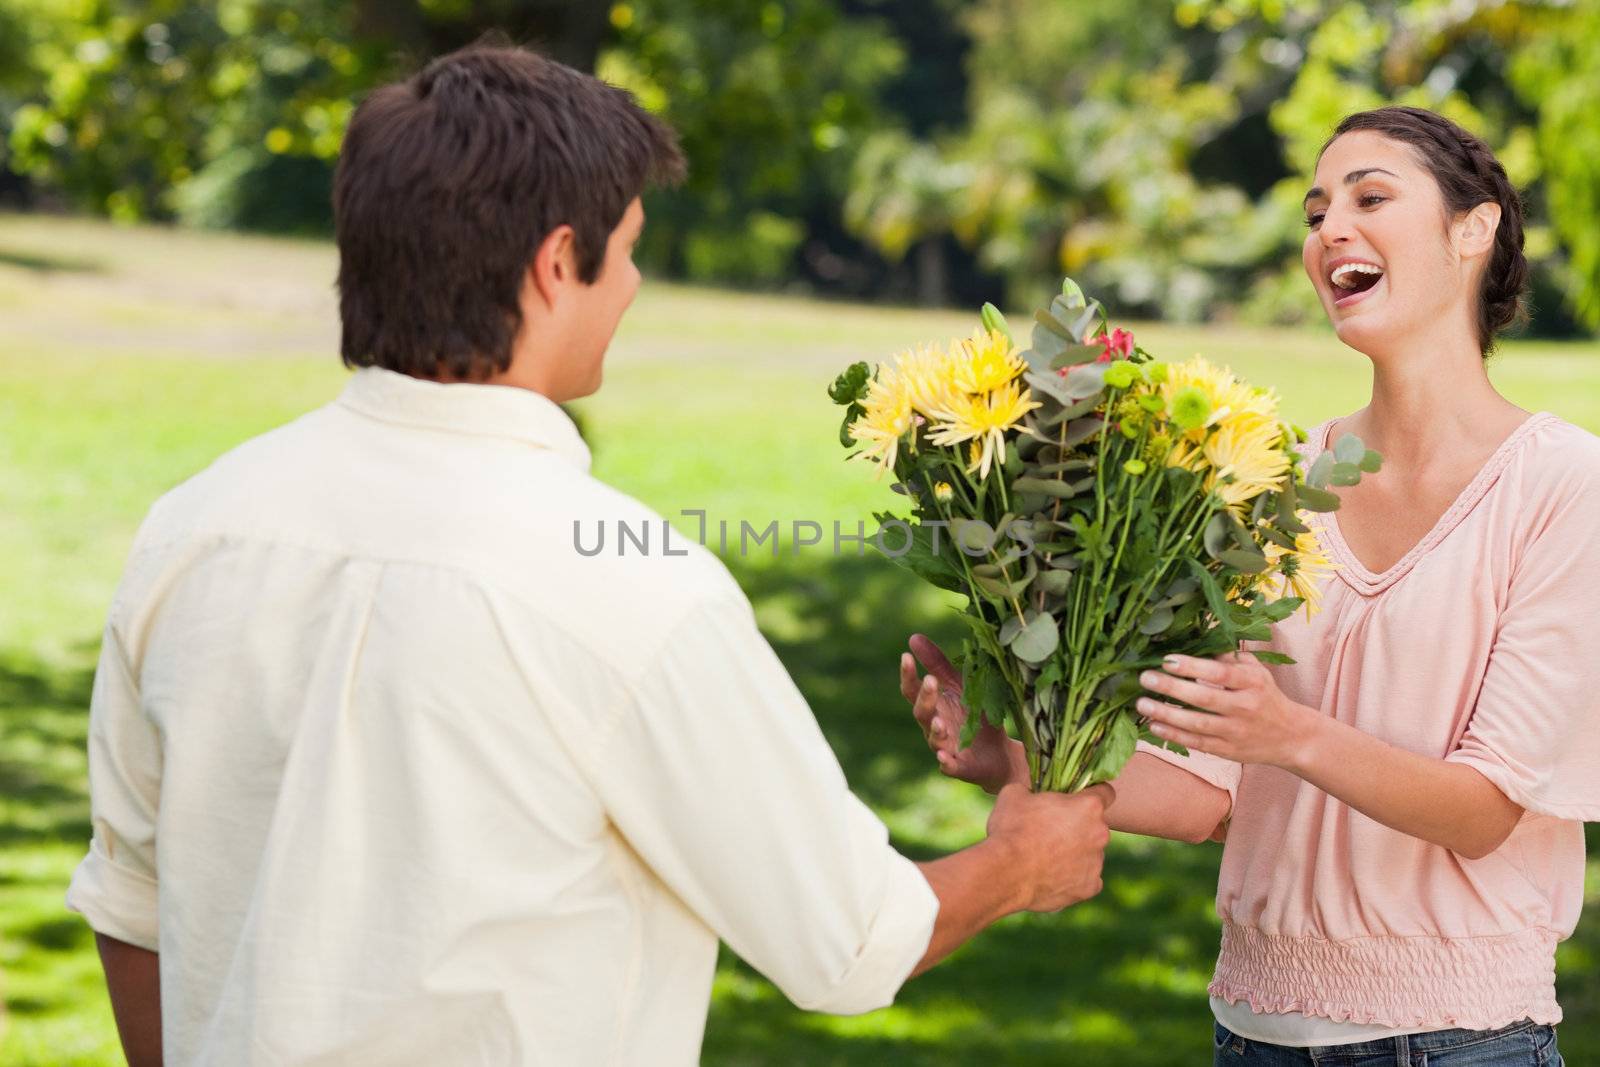 Man presents his friend with flowers by Wavebreakmedia